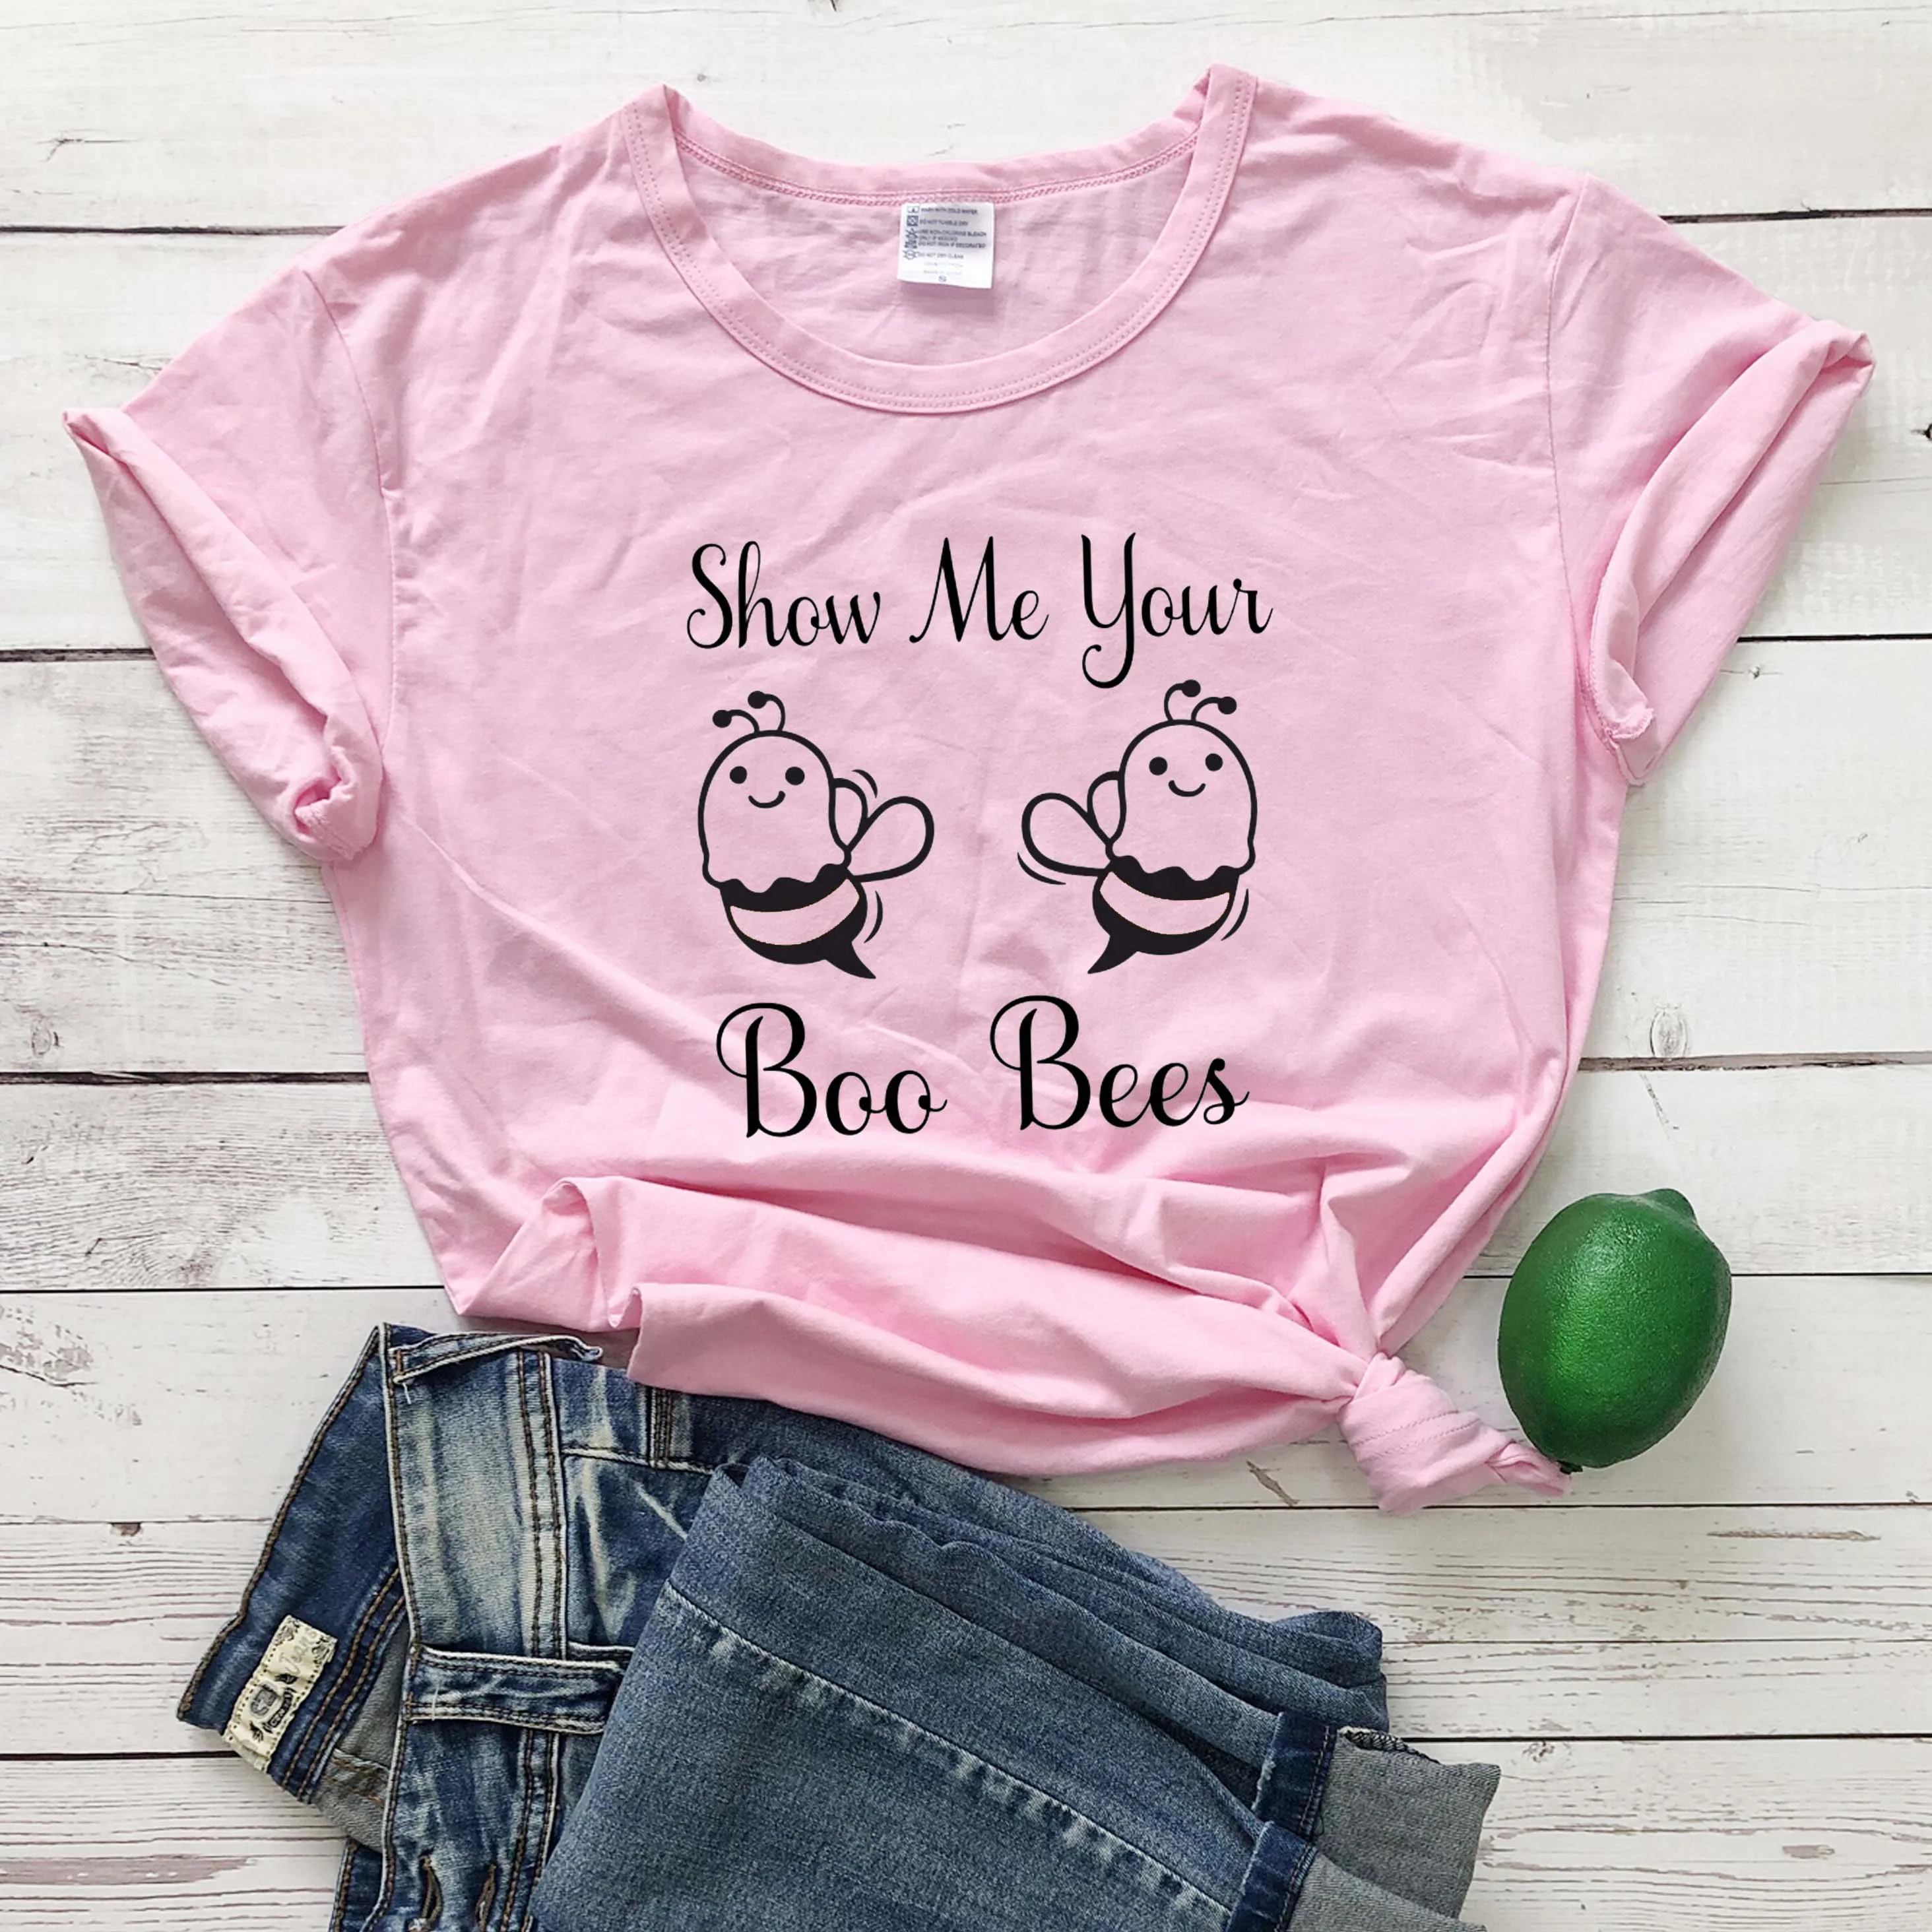 

Show me your boo bees graphic women fashion cotton casual young hipster t shirt young hipster grunge tumblr tees street top M409